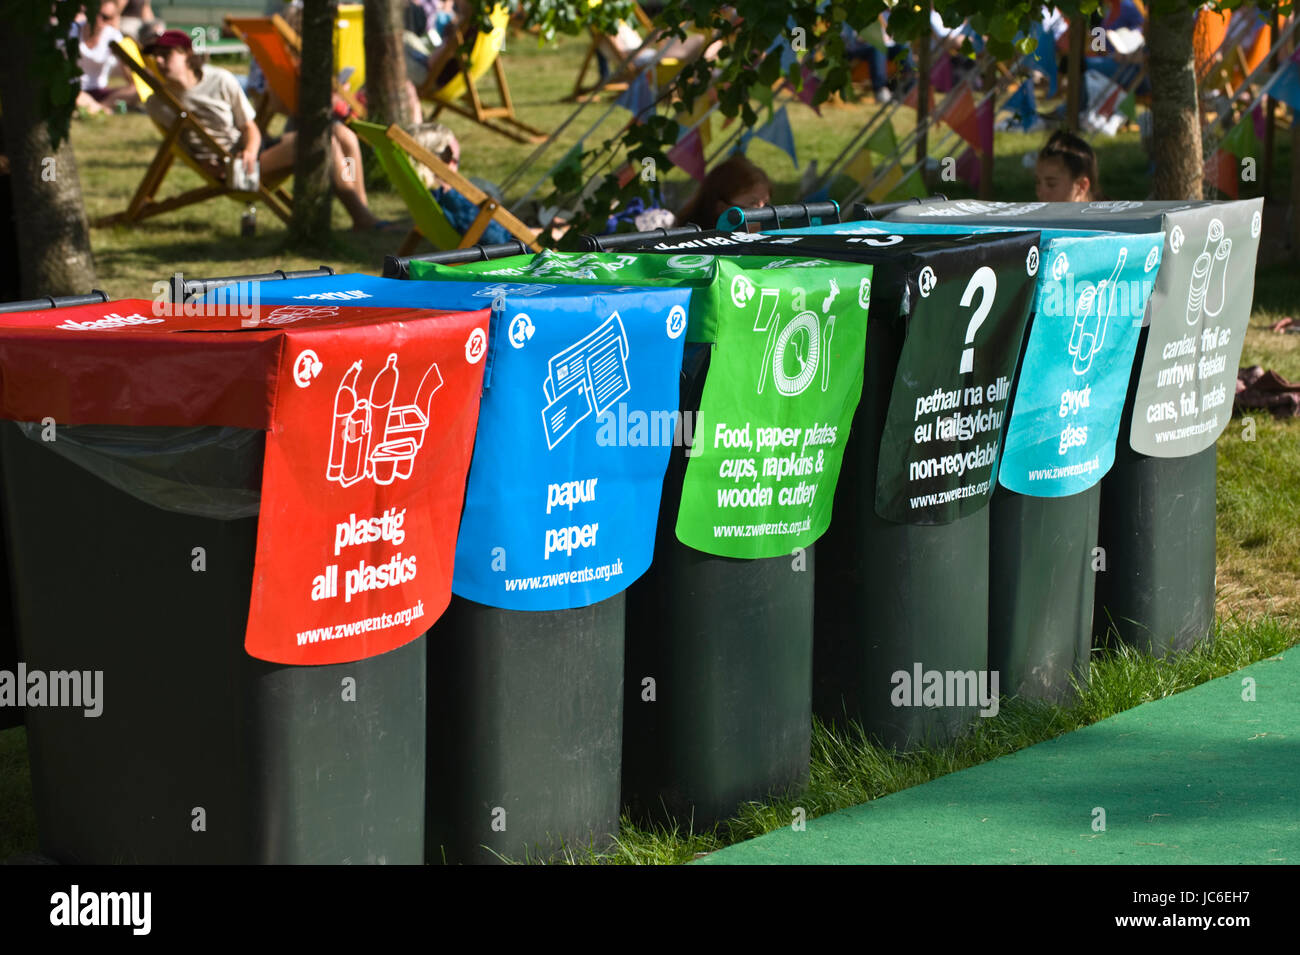 Waste recycling bins at Hay Festival 2017 Hay-on-Wye Powys Wales UK Stock Photo